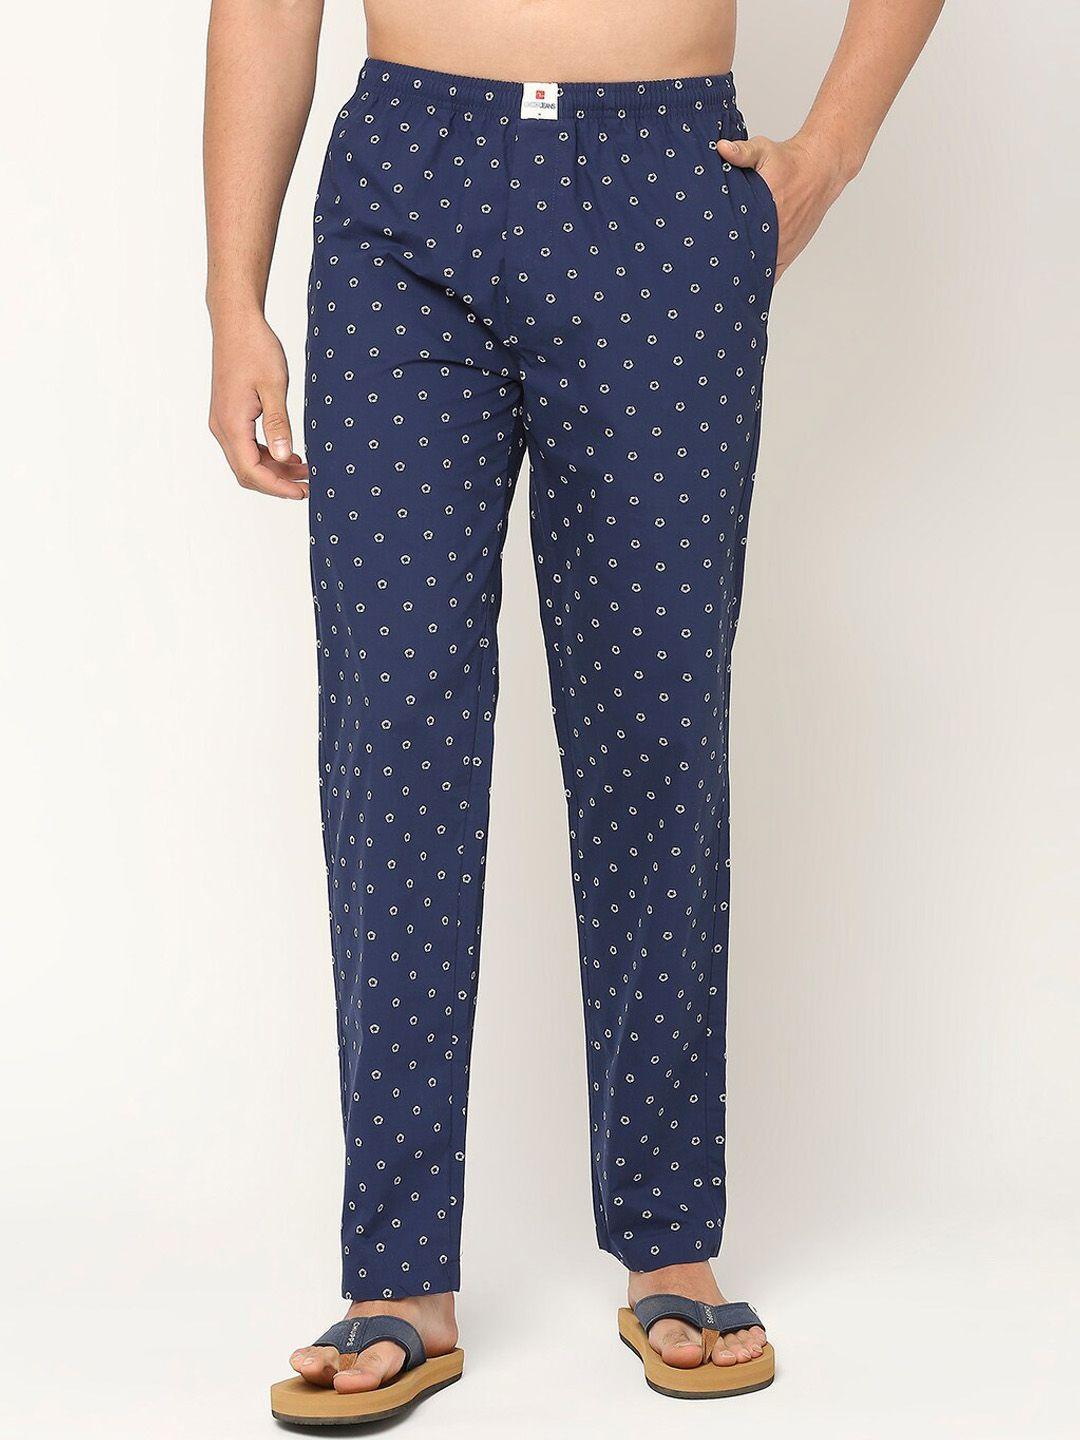 underjeans by spykar men printed cotton mid-rise straight lounge pants